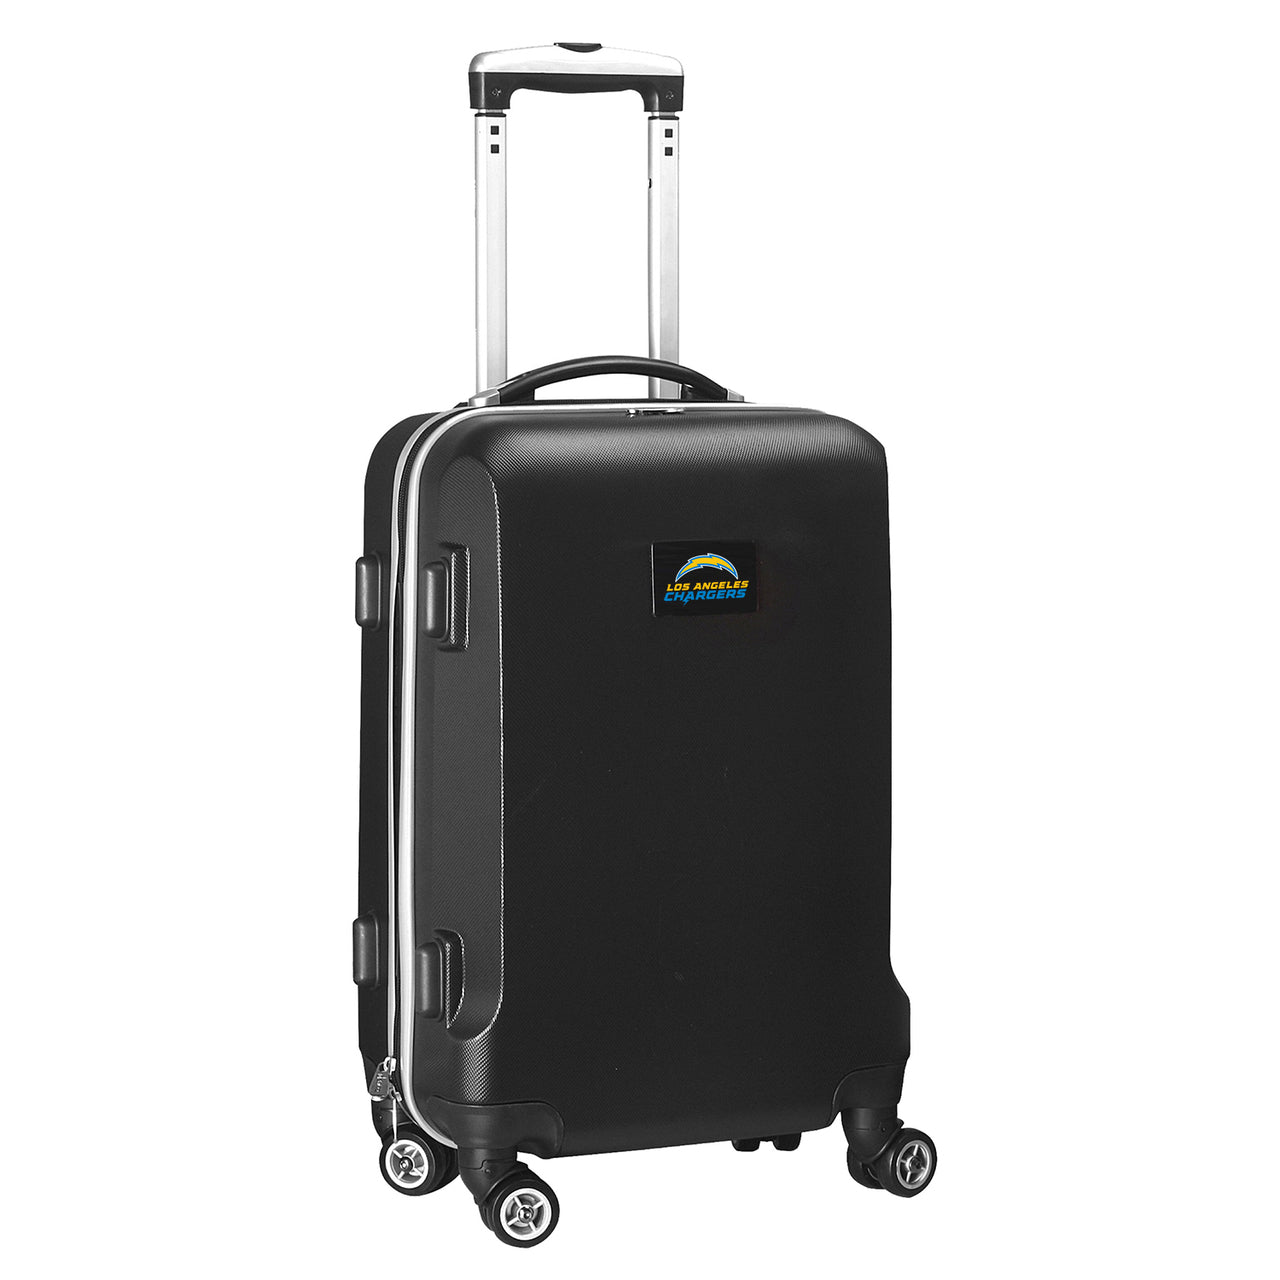 Los Angeles Chargers 20" Hardcase Luggage Carry-on Spinner